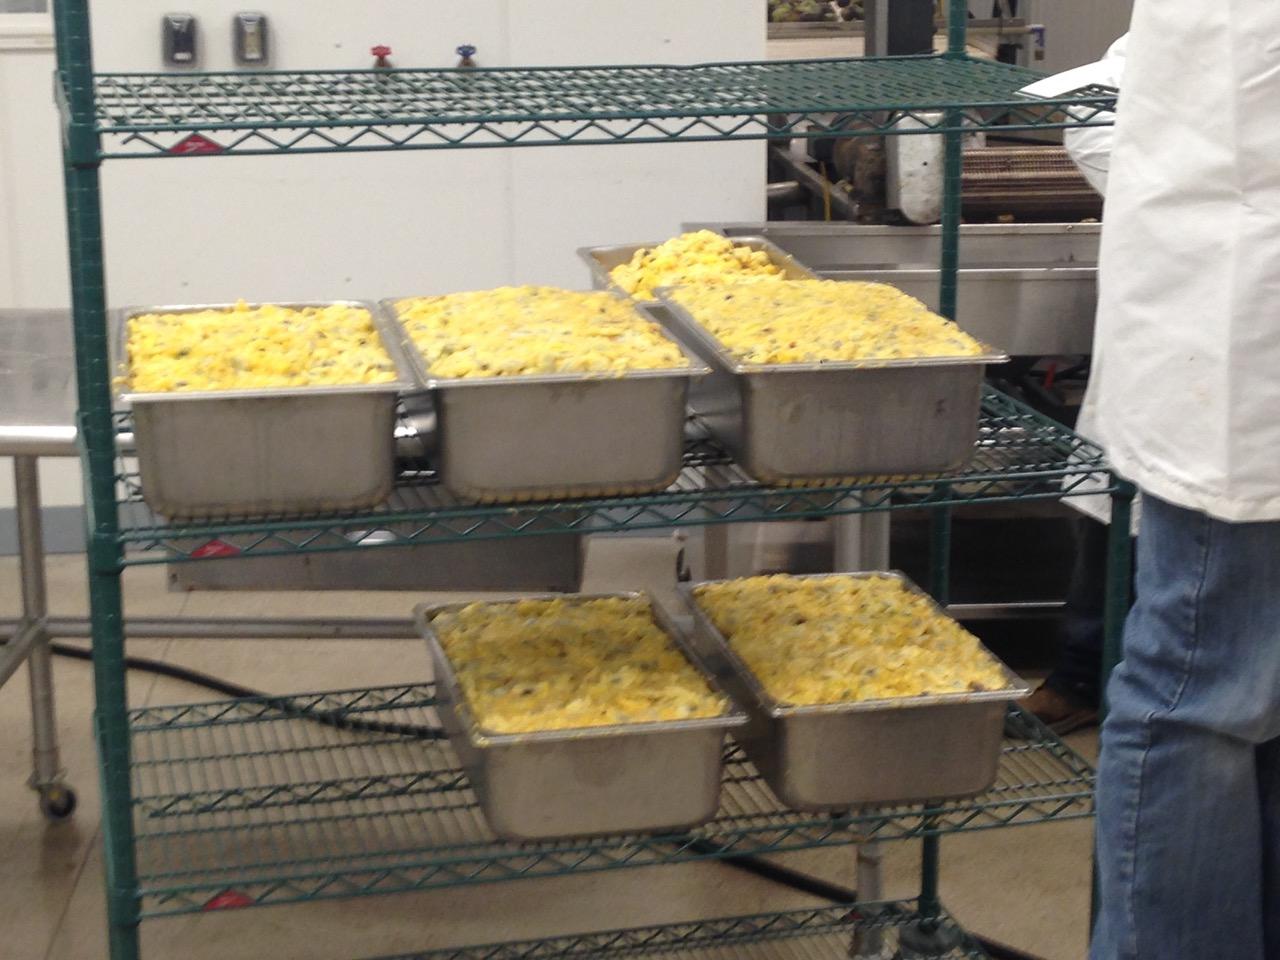 Pawpaw pulp sits in trays before being processed by fruit processing machine. 